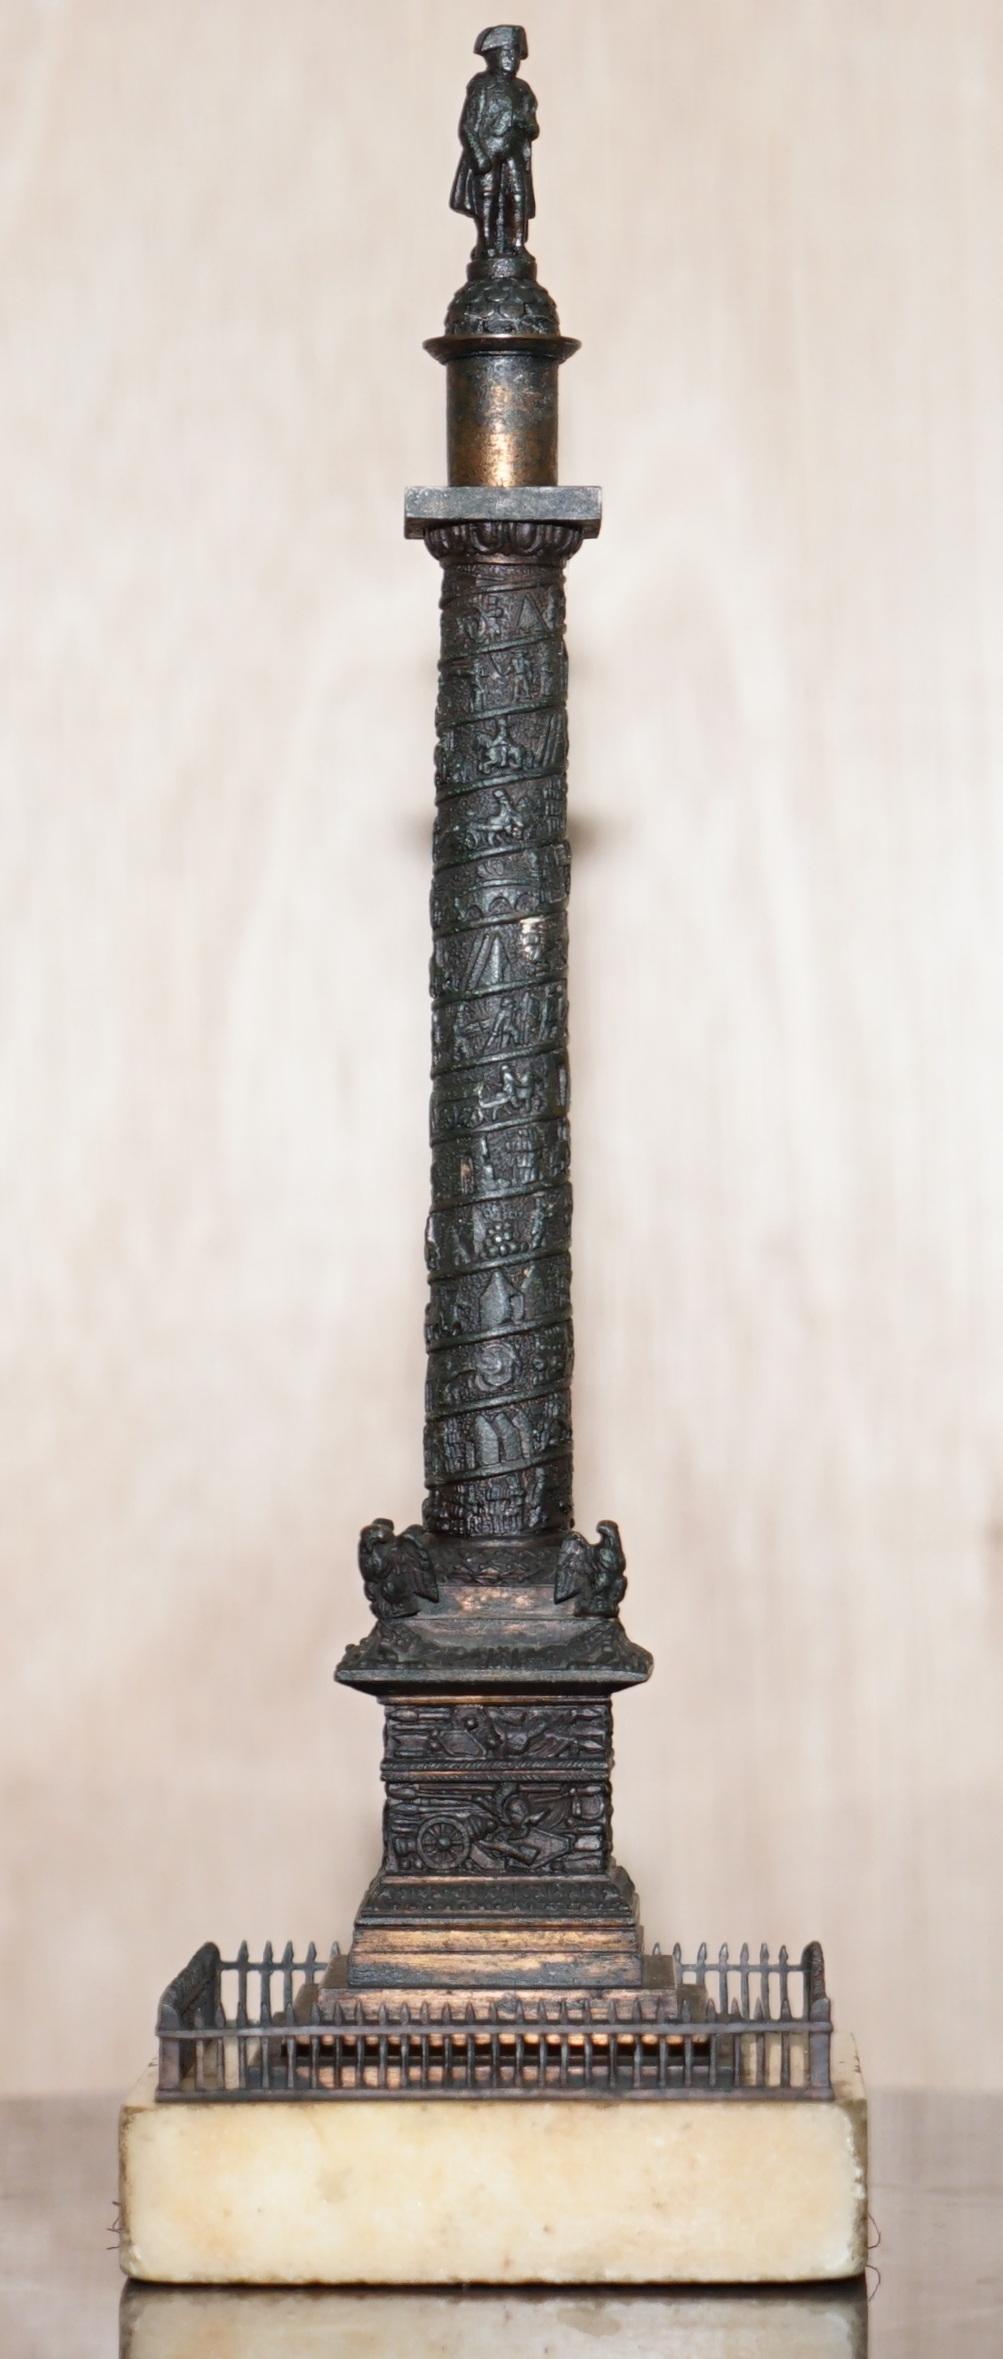 We are delighted to offer for auction this stunning antique circa 1860 Grand Tour bronze statue of Place Vendome Column with Napoleon on top in solid bronze with a marble base

These statues are very collectable, they were basically souvenirs for